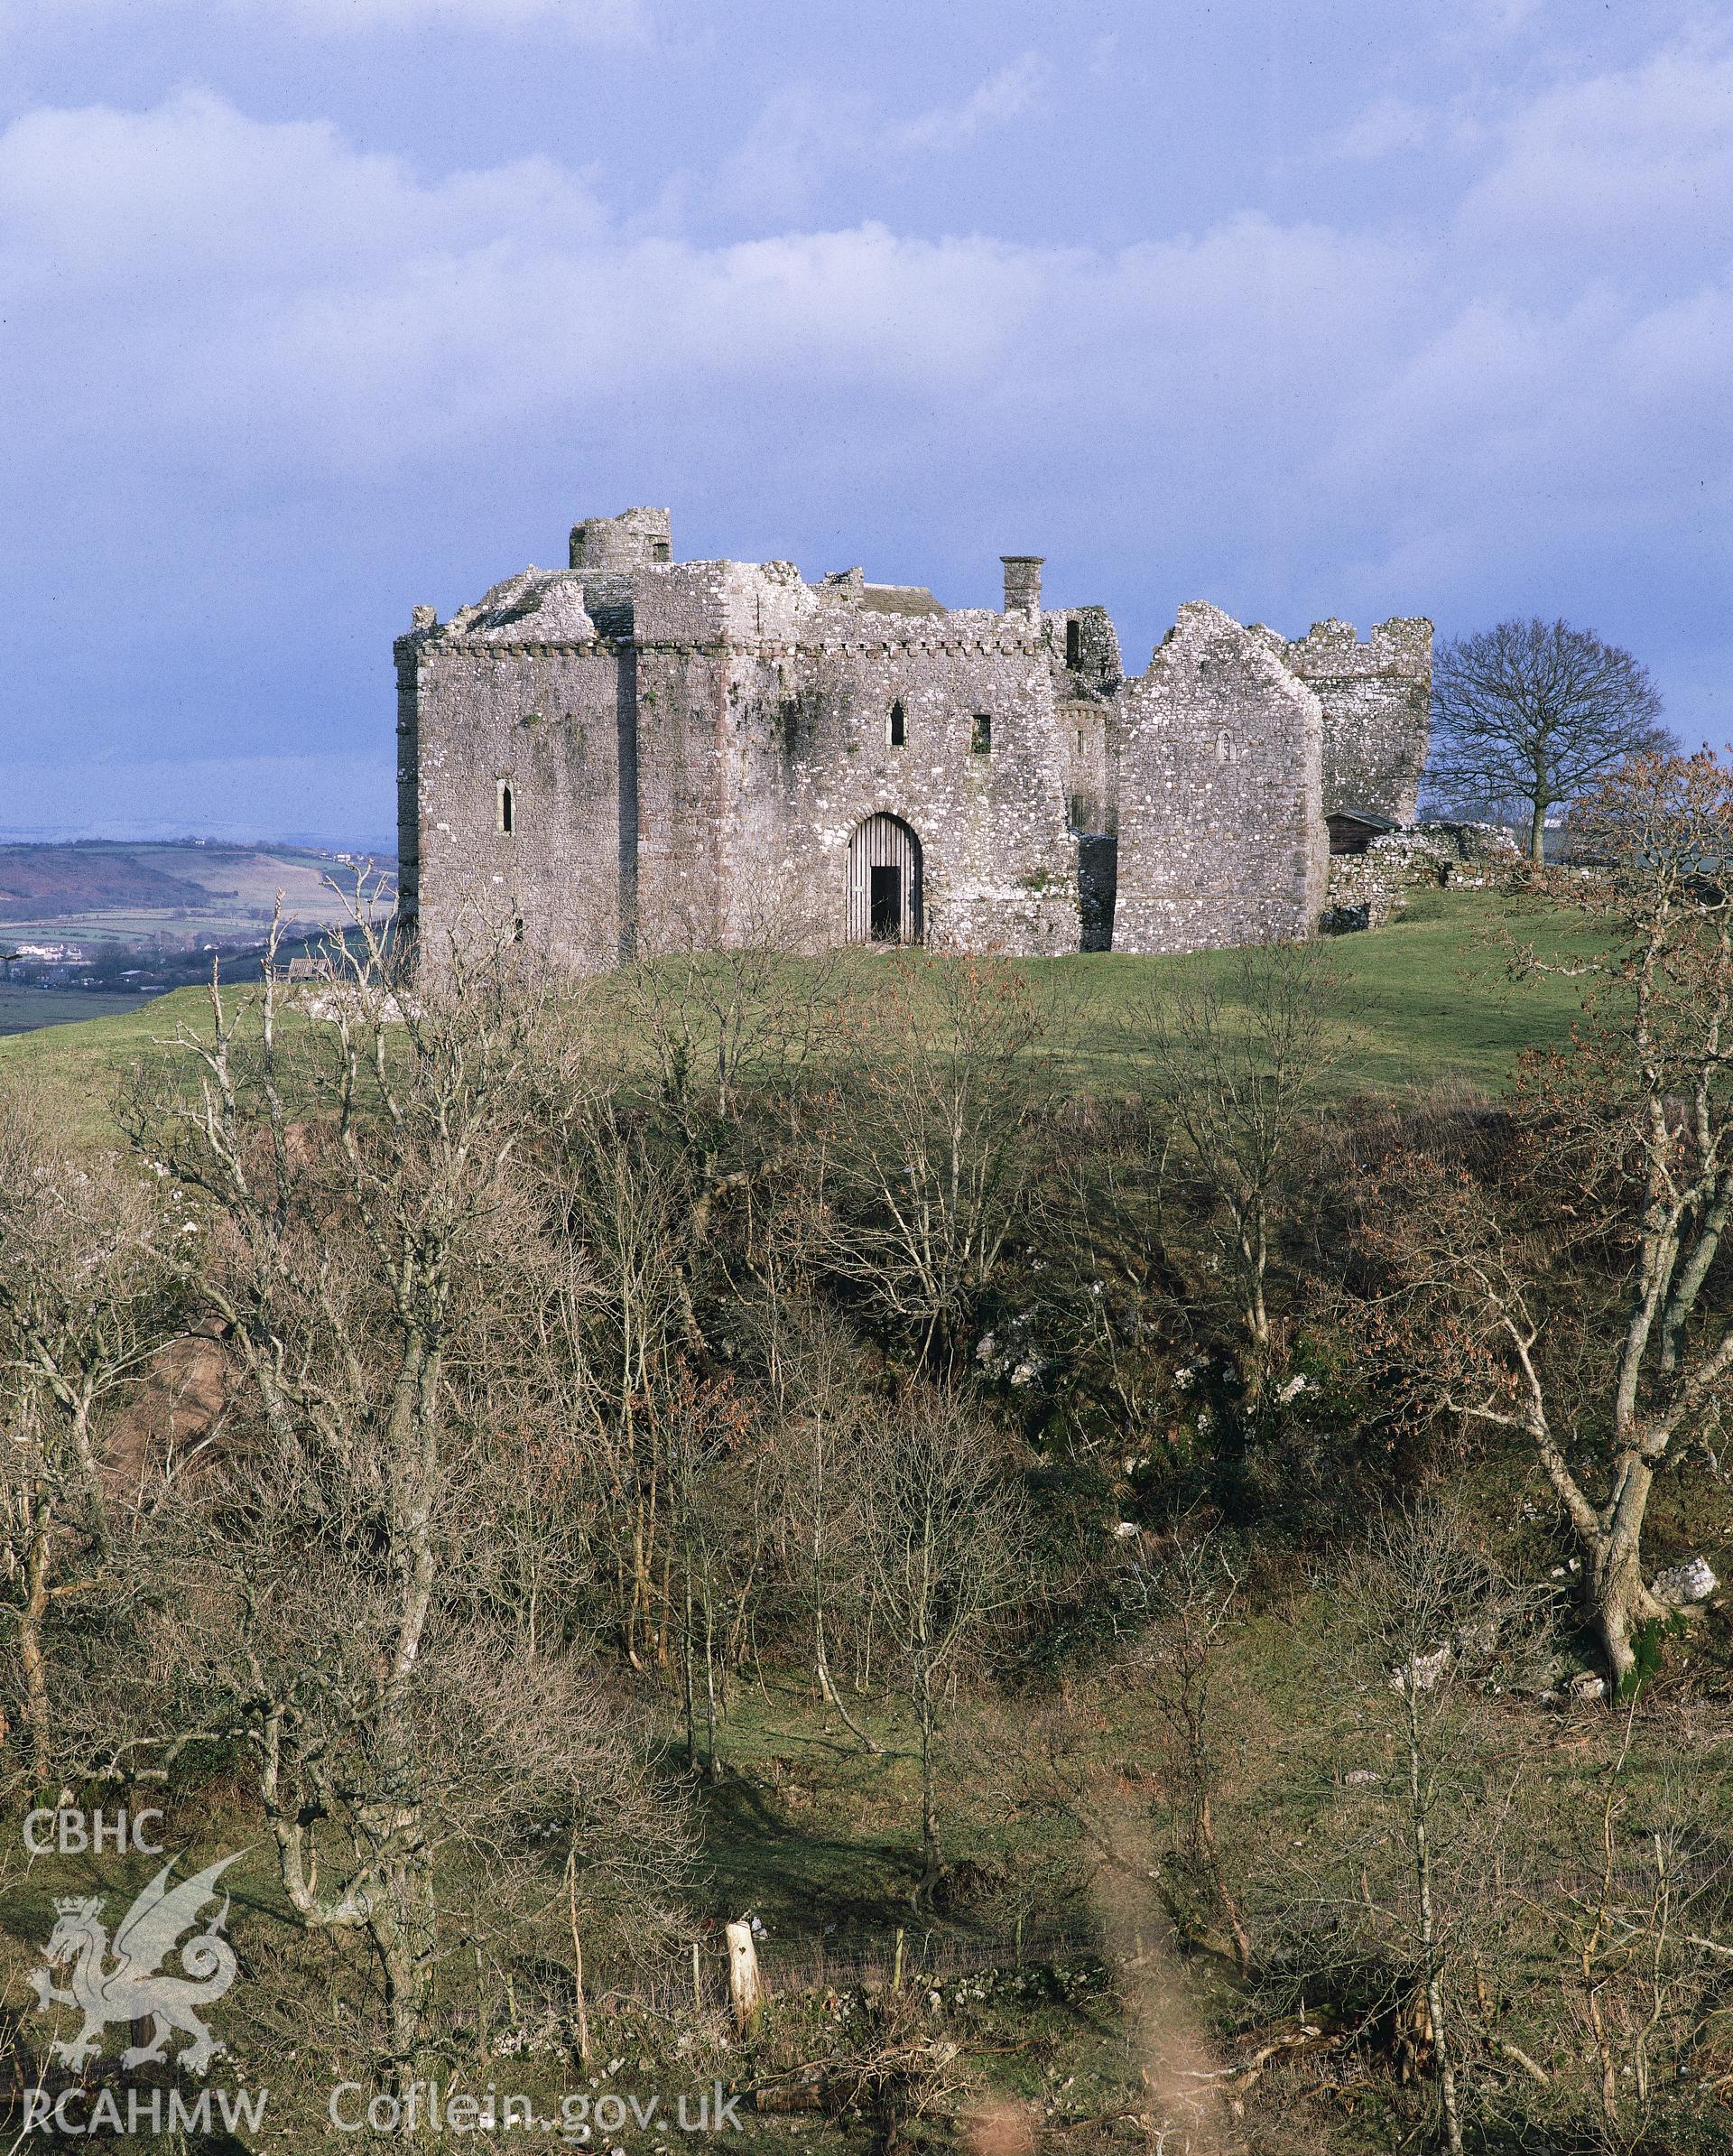 RCAHMW colour transparency showing Weobley Castle.